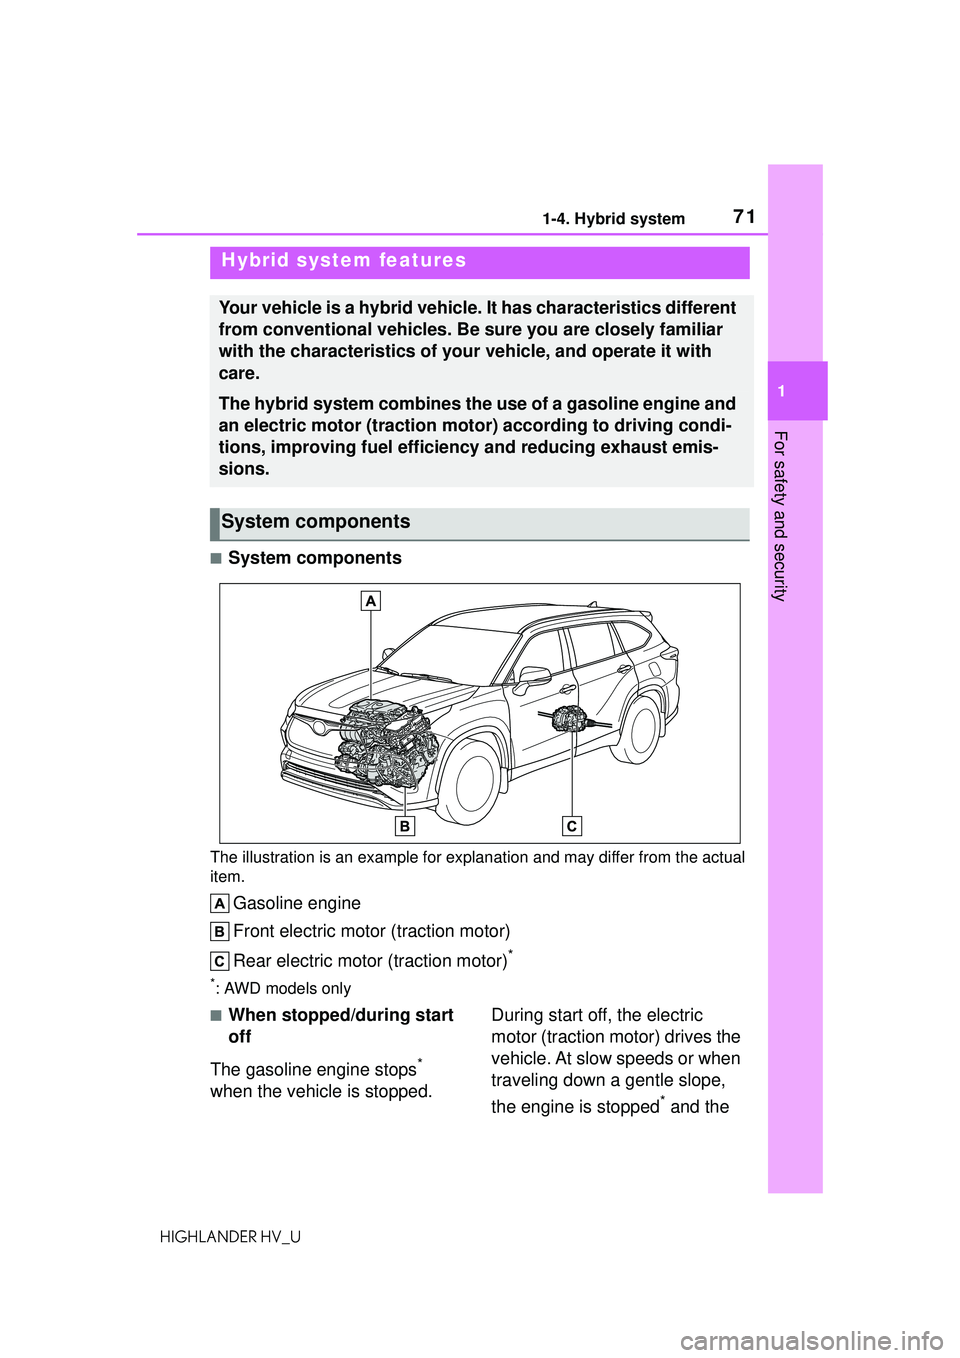 TOYOTA HIGHLANDER HYBRID 2021  Owners Manual (in English) 711-4. Hybrid system
1
For safety and security
HIGHLANDER HV_U
1-4.Hybrid system
■System components
The illustration is an example for explanation and may differ from the actual 
item.
Gasoline engi